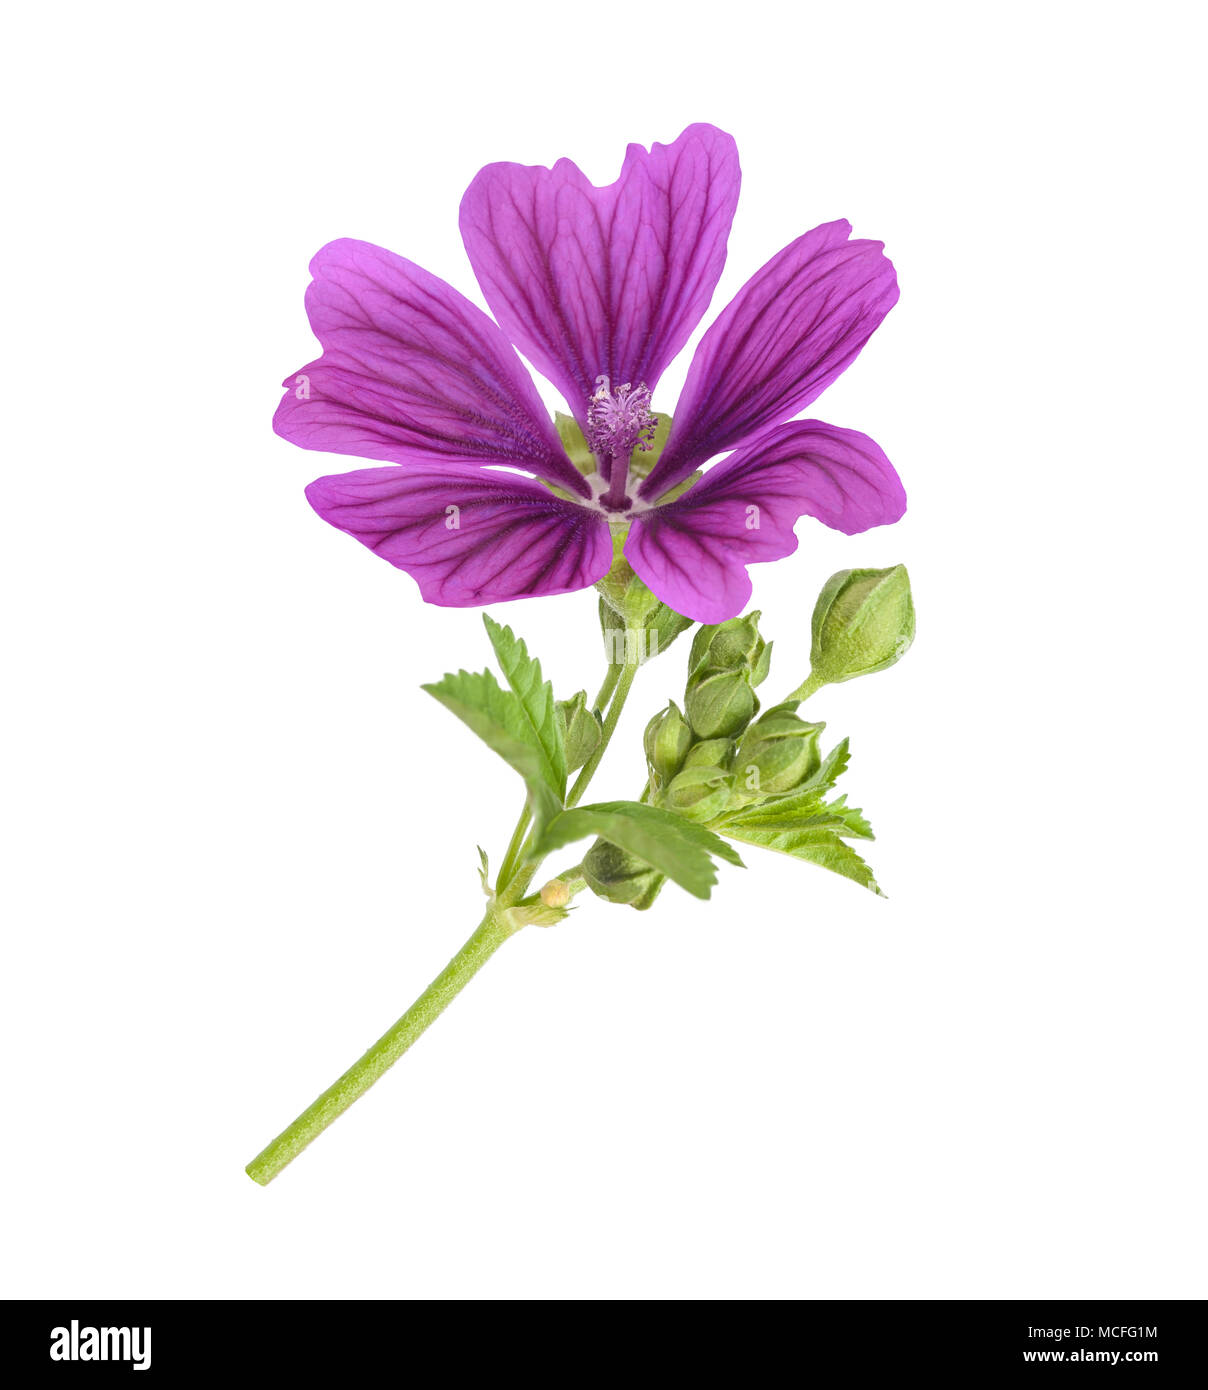 Mallow plante avec flower isolated on white Banque D'Images